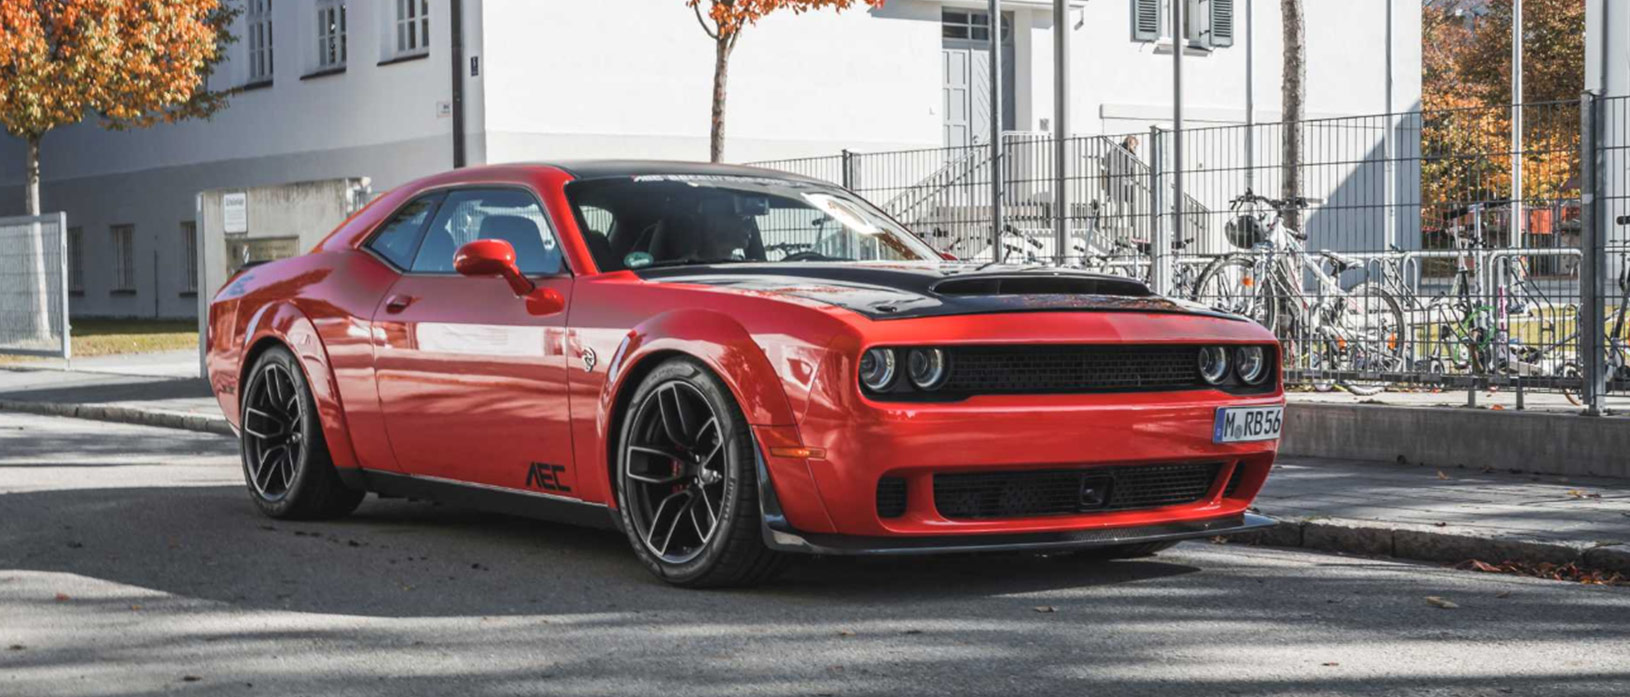 This Dodge Challenger SRT<sup>®</sup> Hellcat XR Makes Jaws Drop